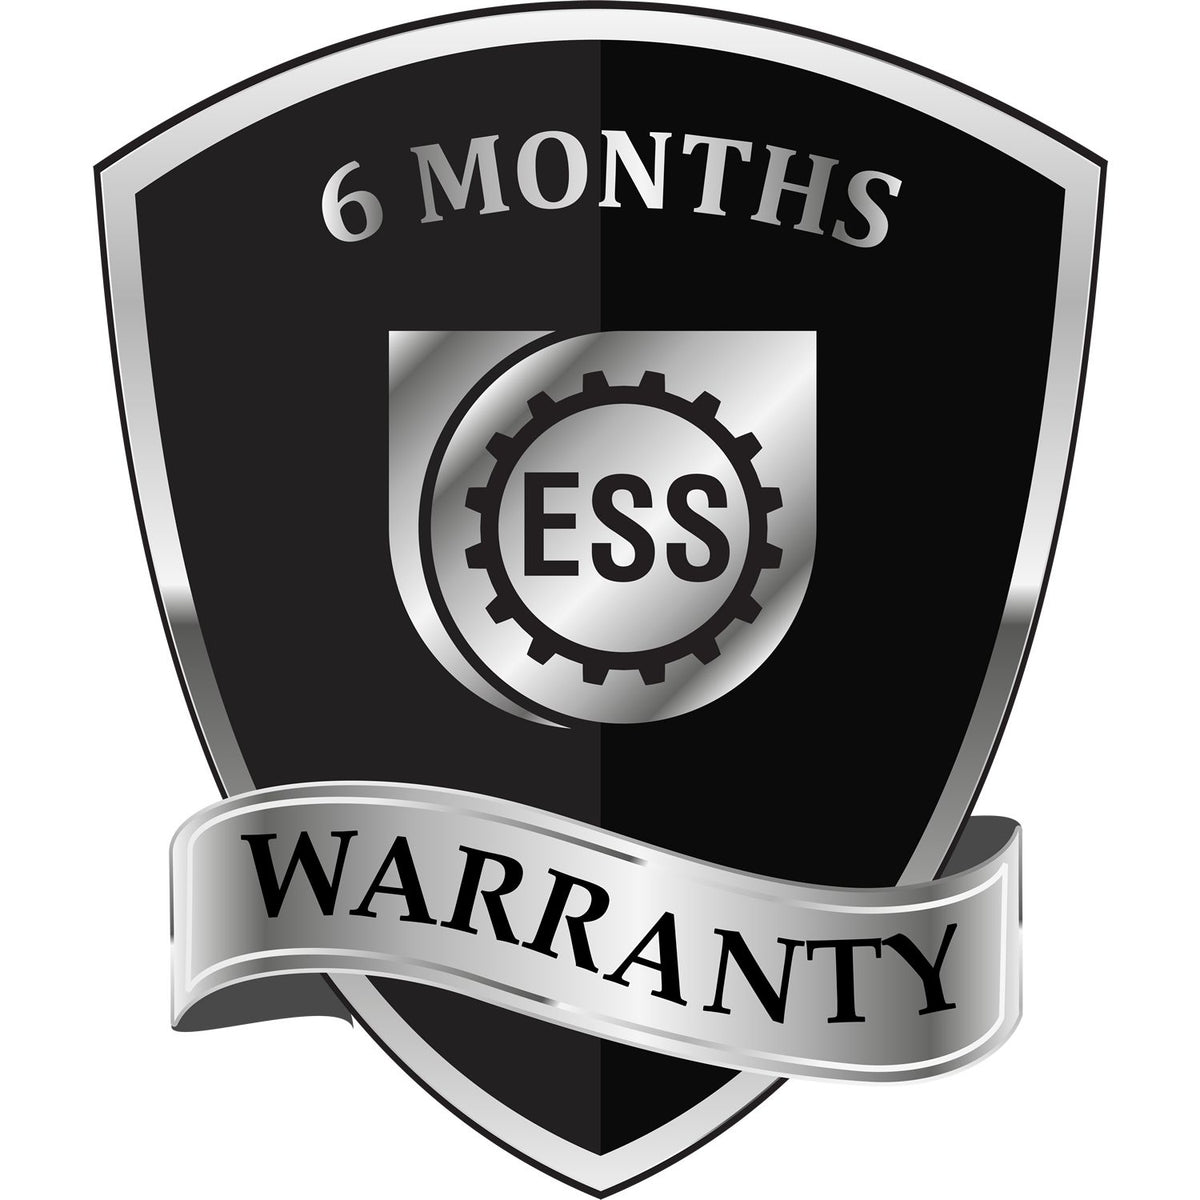 A black and silver badge or emblem showing warranty information for the Missouri Professional Geologist Seal Stamp